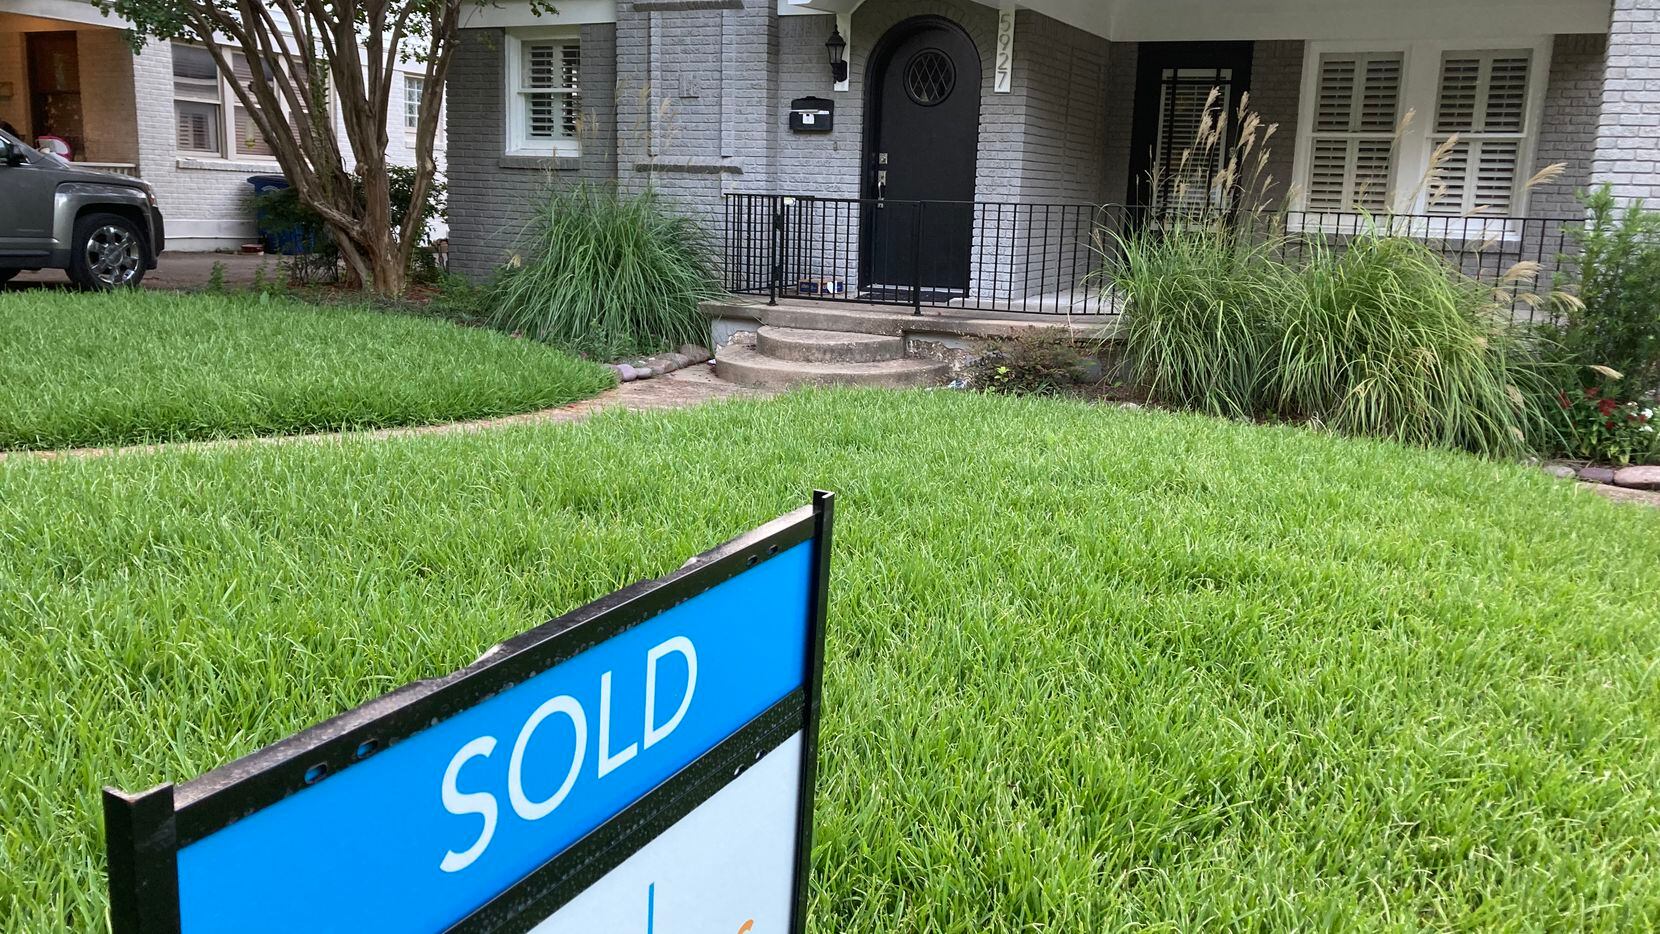 The Dallas area had one of the greatest home price gains among the 20 major U.S. markets...